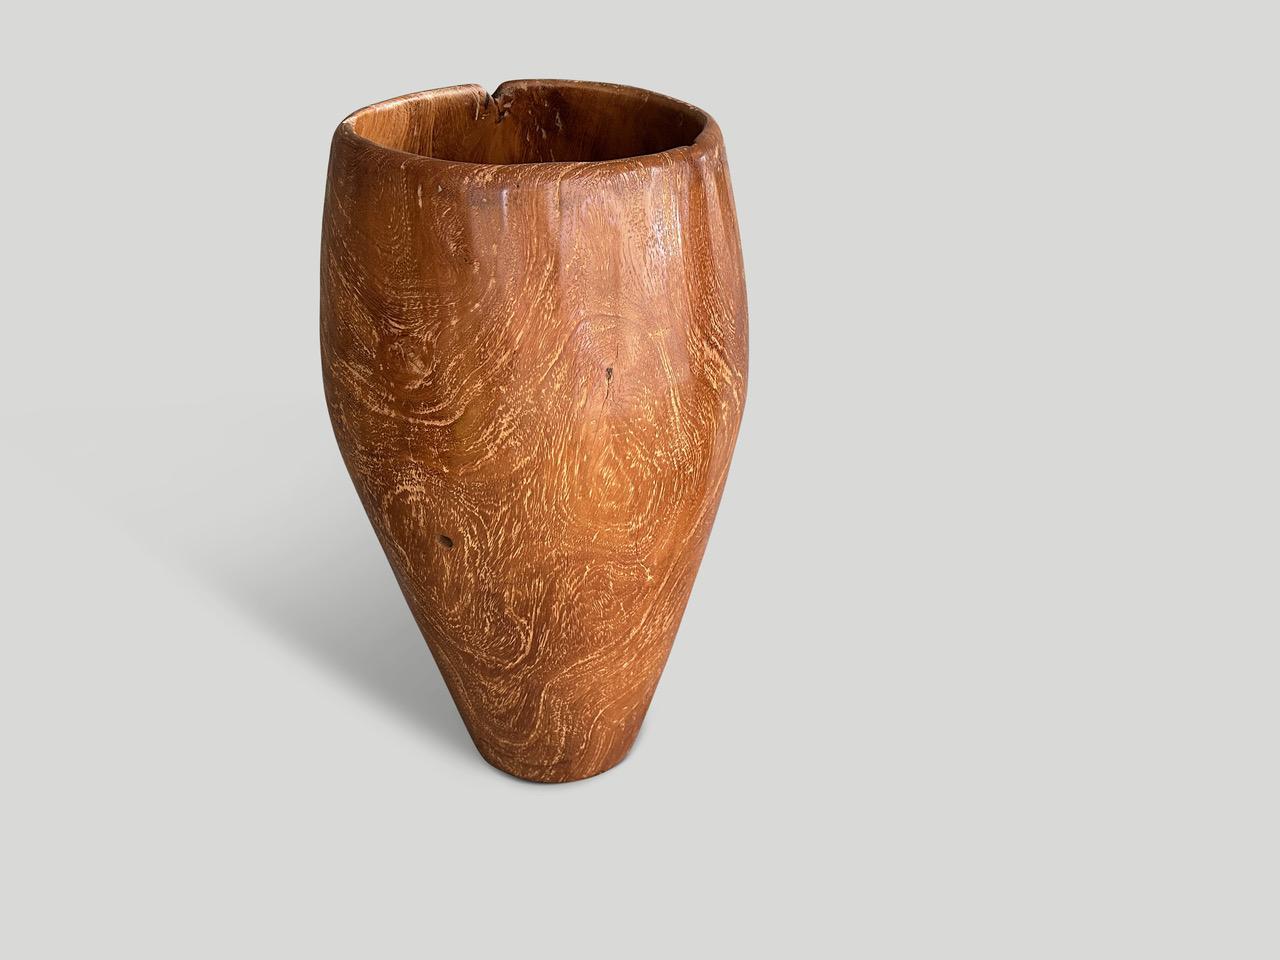 Andrianna Shamaris Sculptural Antique Teak Wood Container In Excellent Condition For Sale In New York, NY